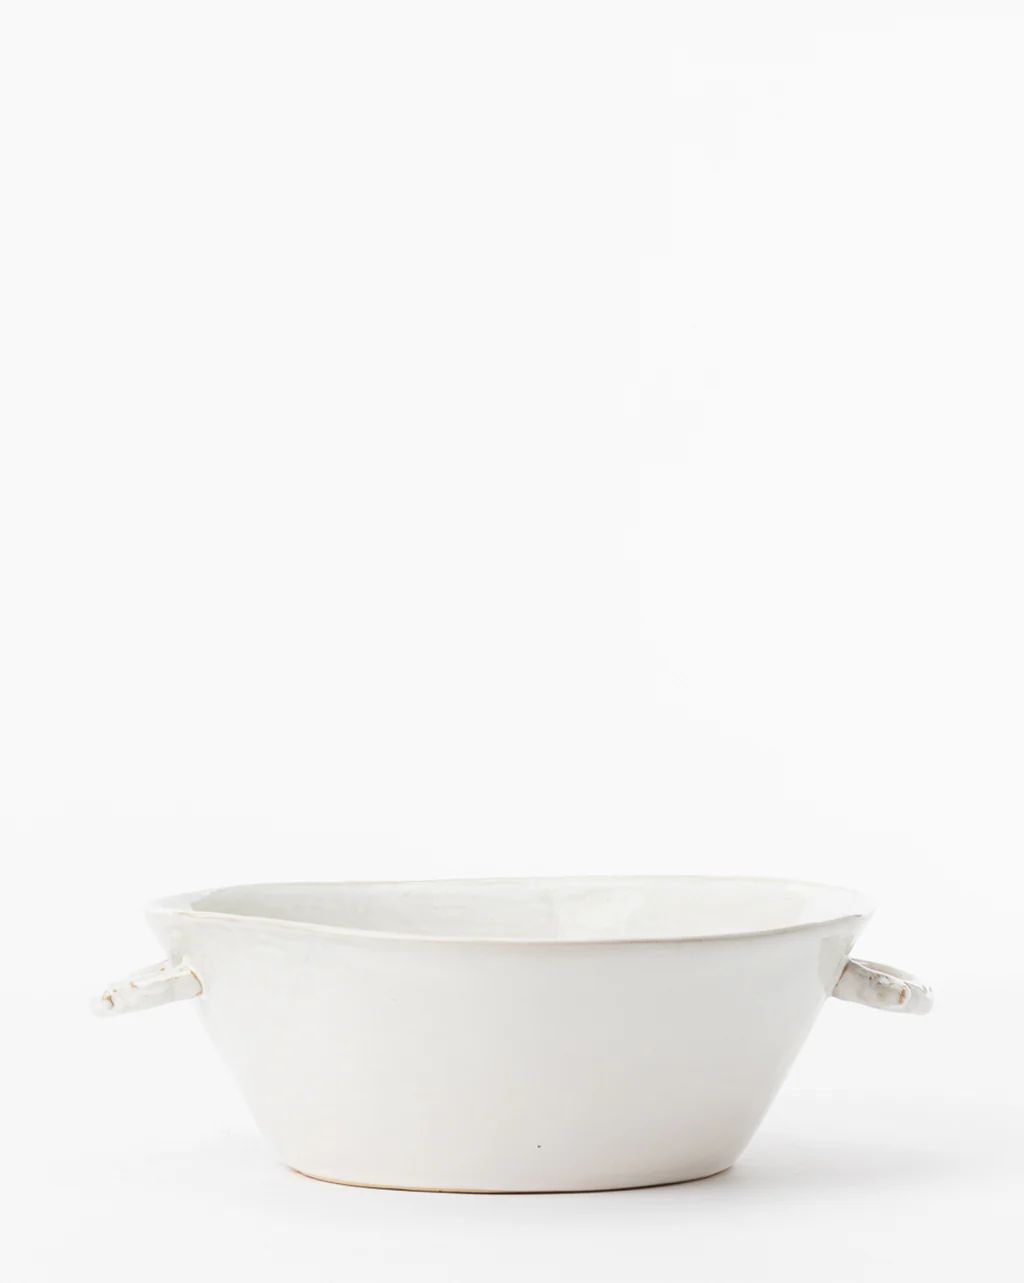 Handled Bowl | McGee & Co.